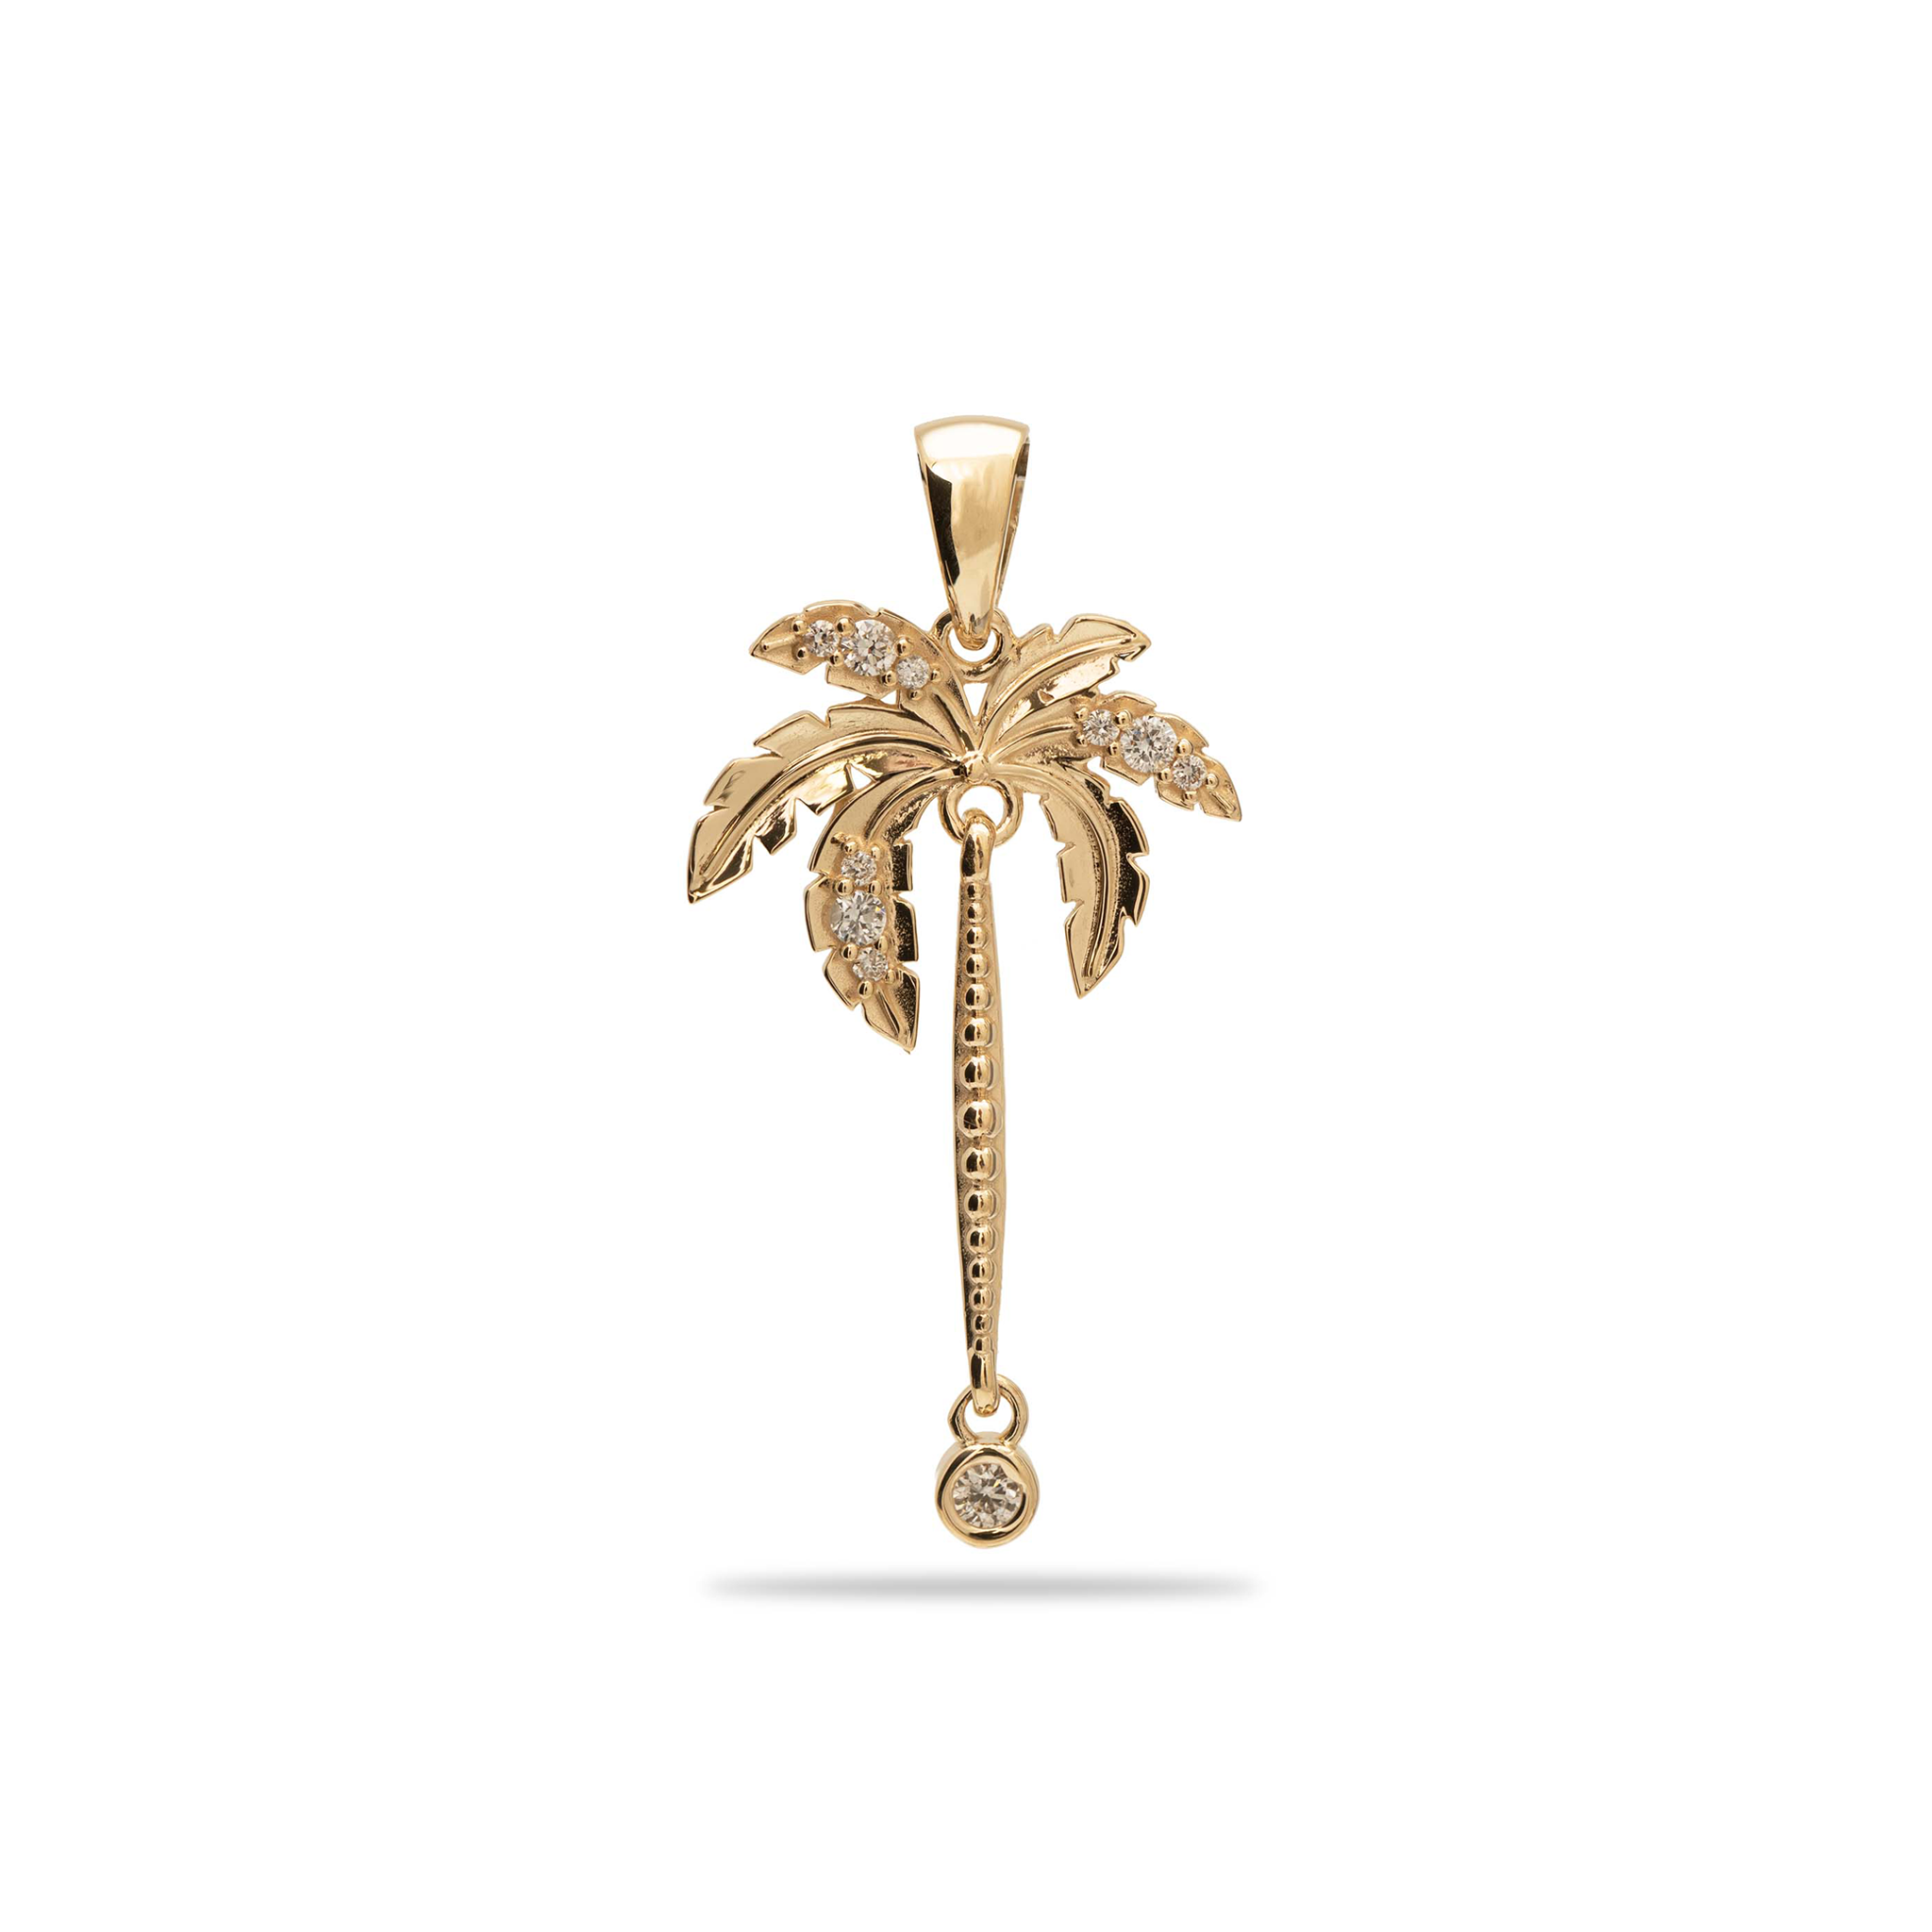 Paradise Palms - Palm Tree Pendant in Gold with Diamonds - 28mm